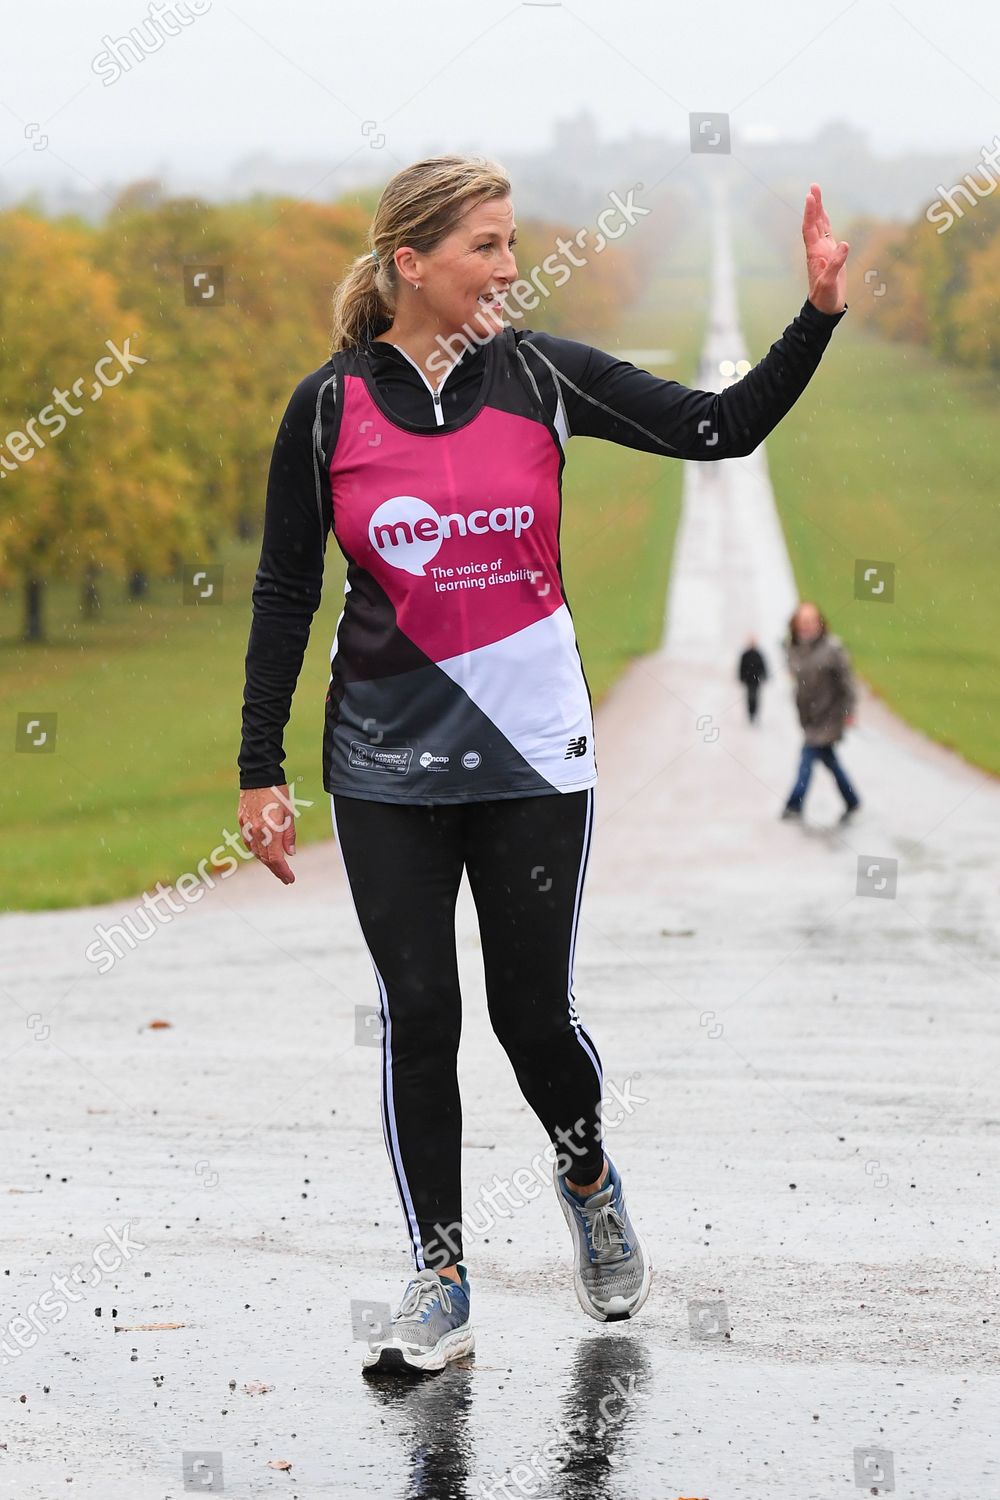 sophie-countess-of-wessex-joins-with-mencaps-learning-disability-running-team-windsor-uk-shutterstock-editorial-10876999ax.jpg